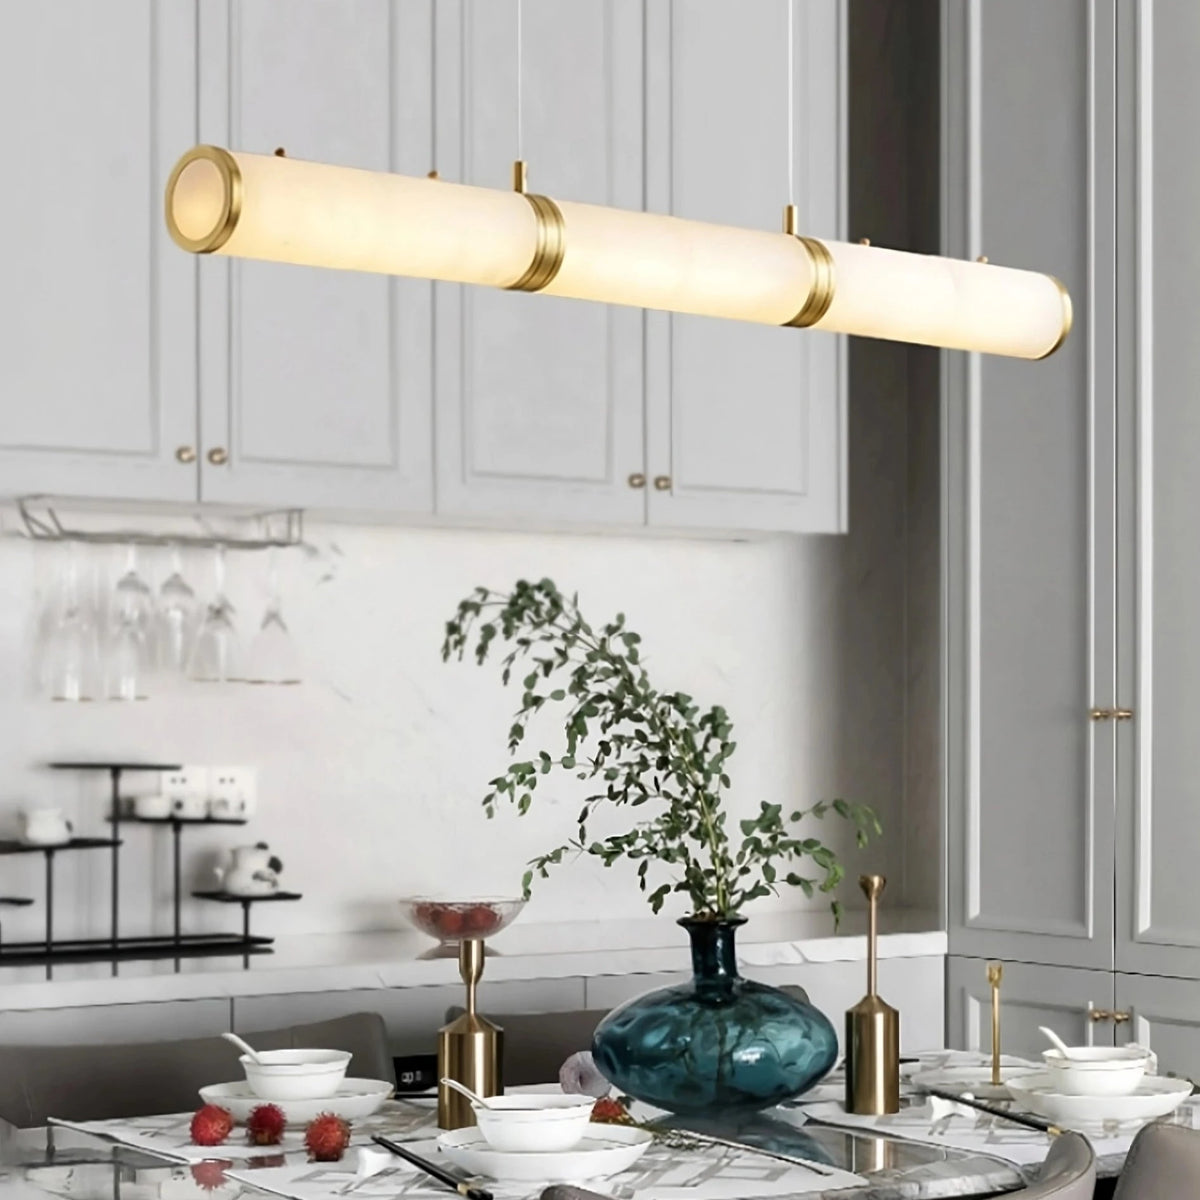 Moonshade Natural Marble Dining Room Lighting Fixture